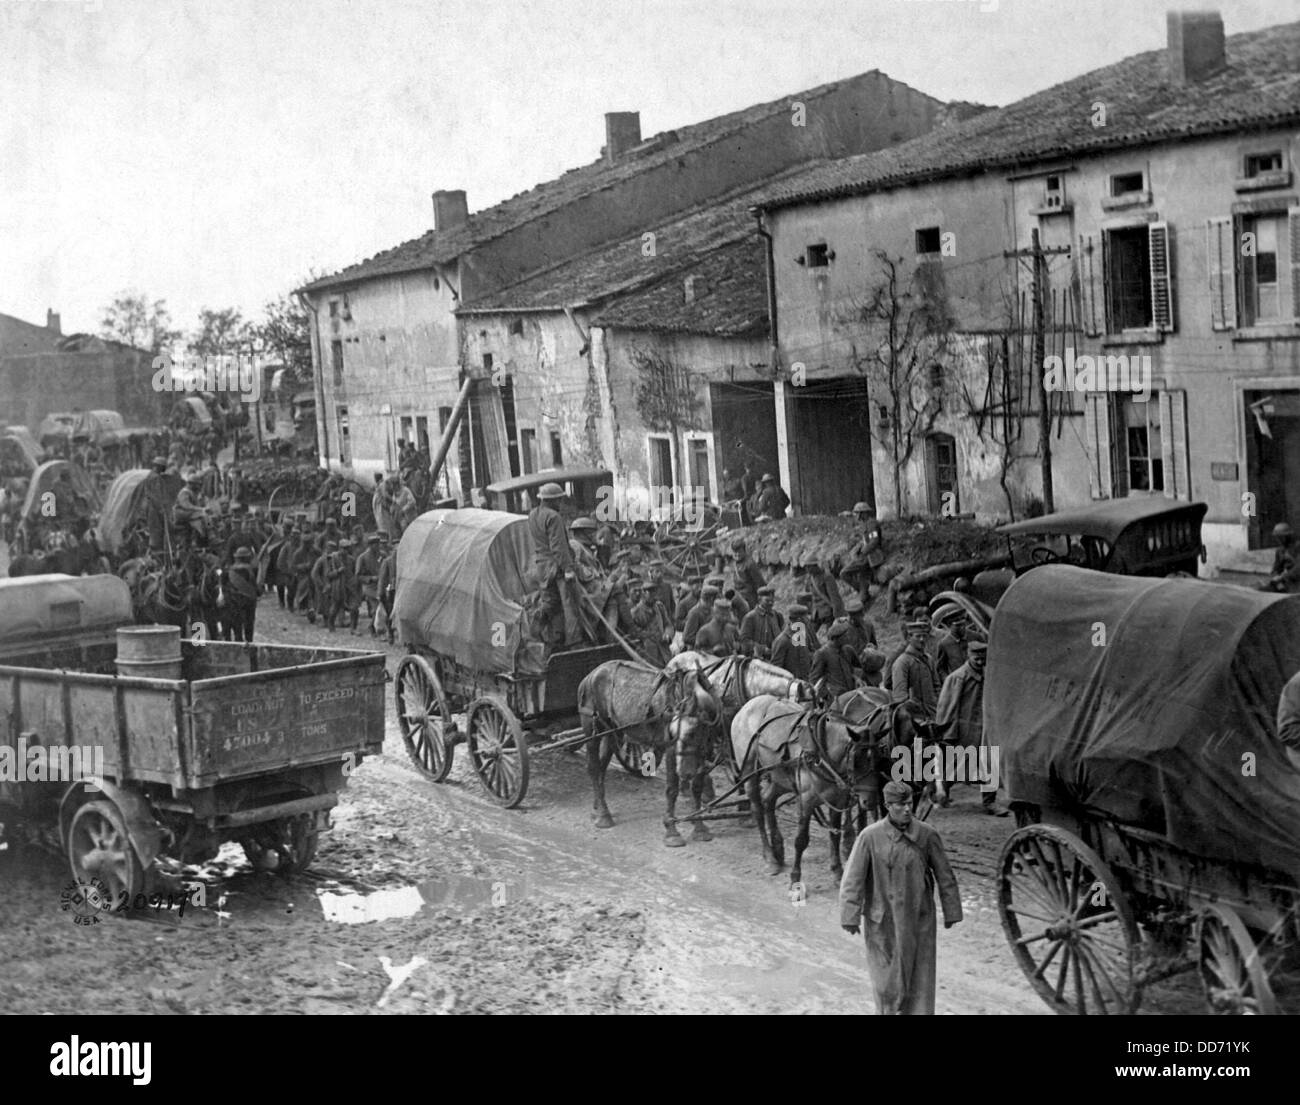 German prisoners taken by the Americans in the first day of the assault on the St. Mihiel salient. They are marching to prison Stock Photo